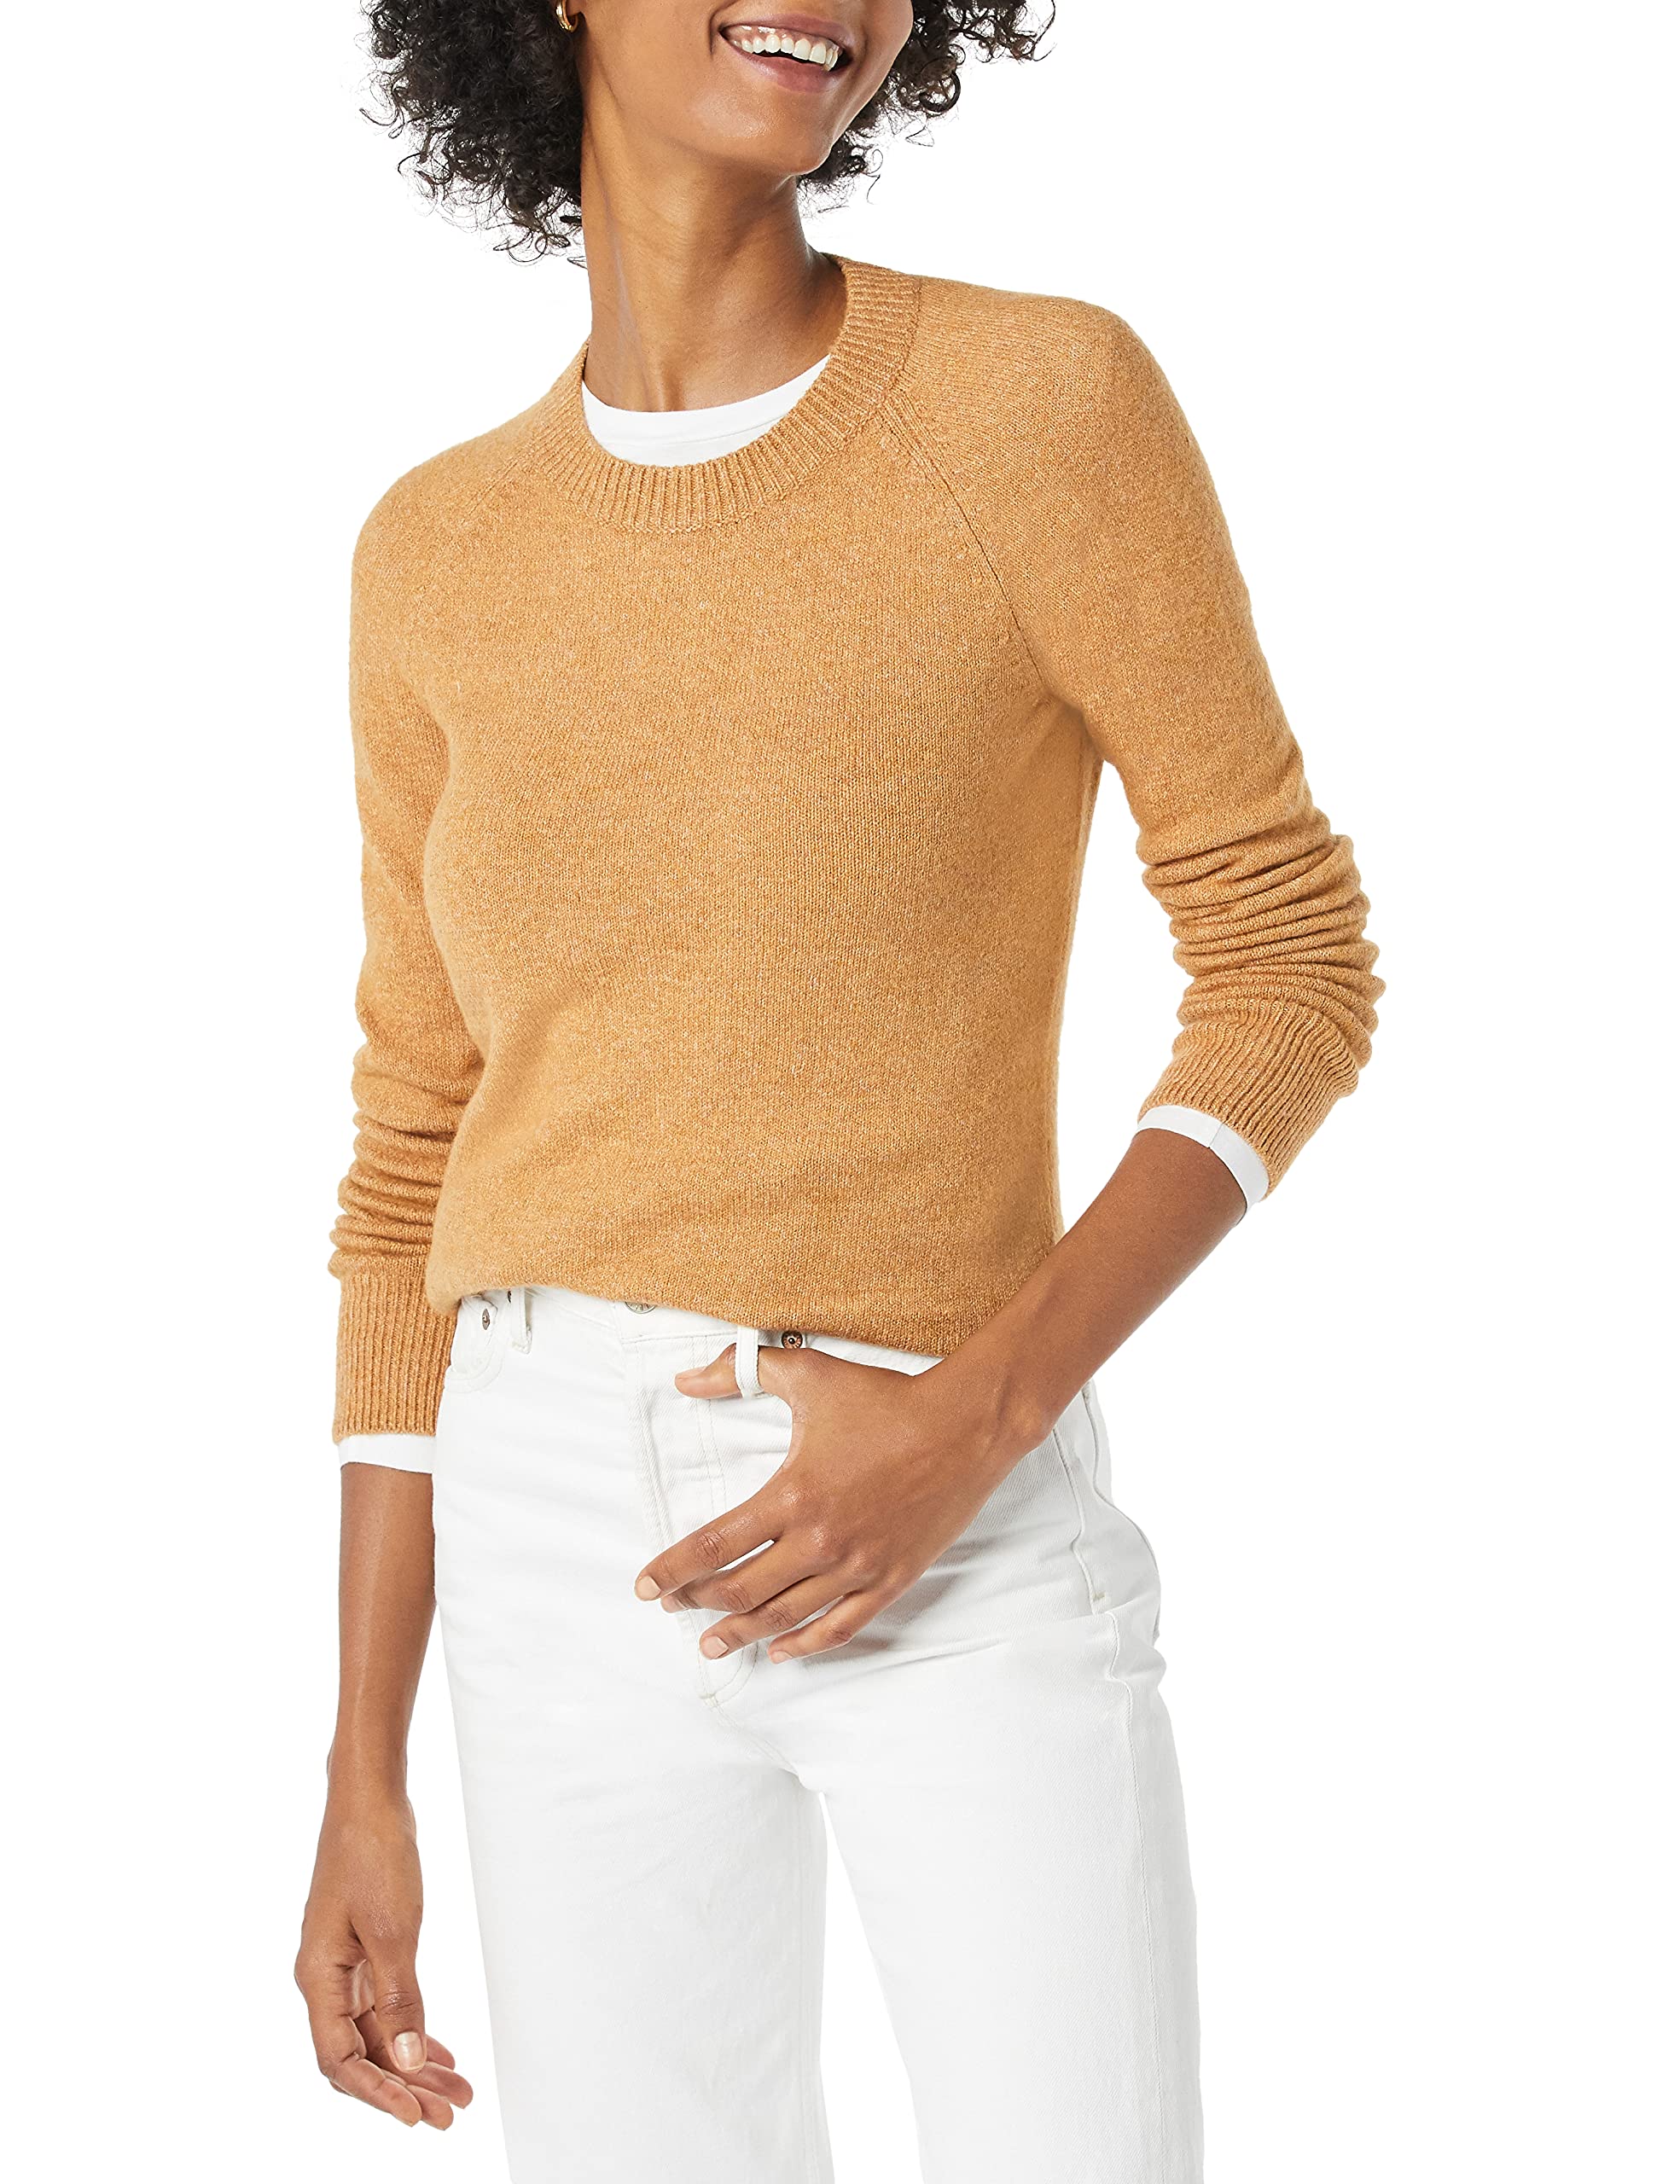 Amazon Essentials Women's Classic-Fit Soft Touch Long-Sleeve Crewneck Sweater (Available in Plus Size)